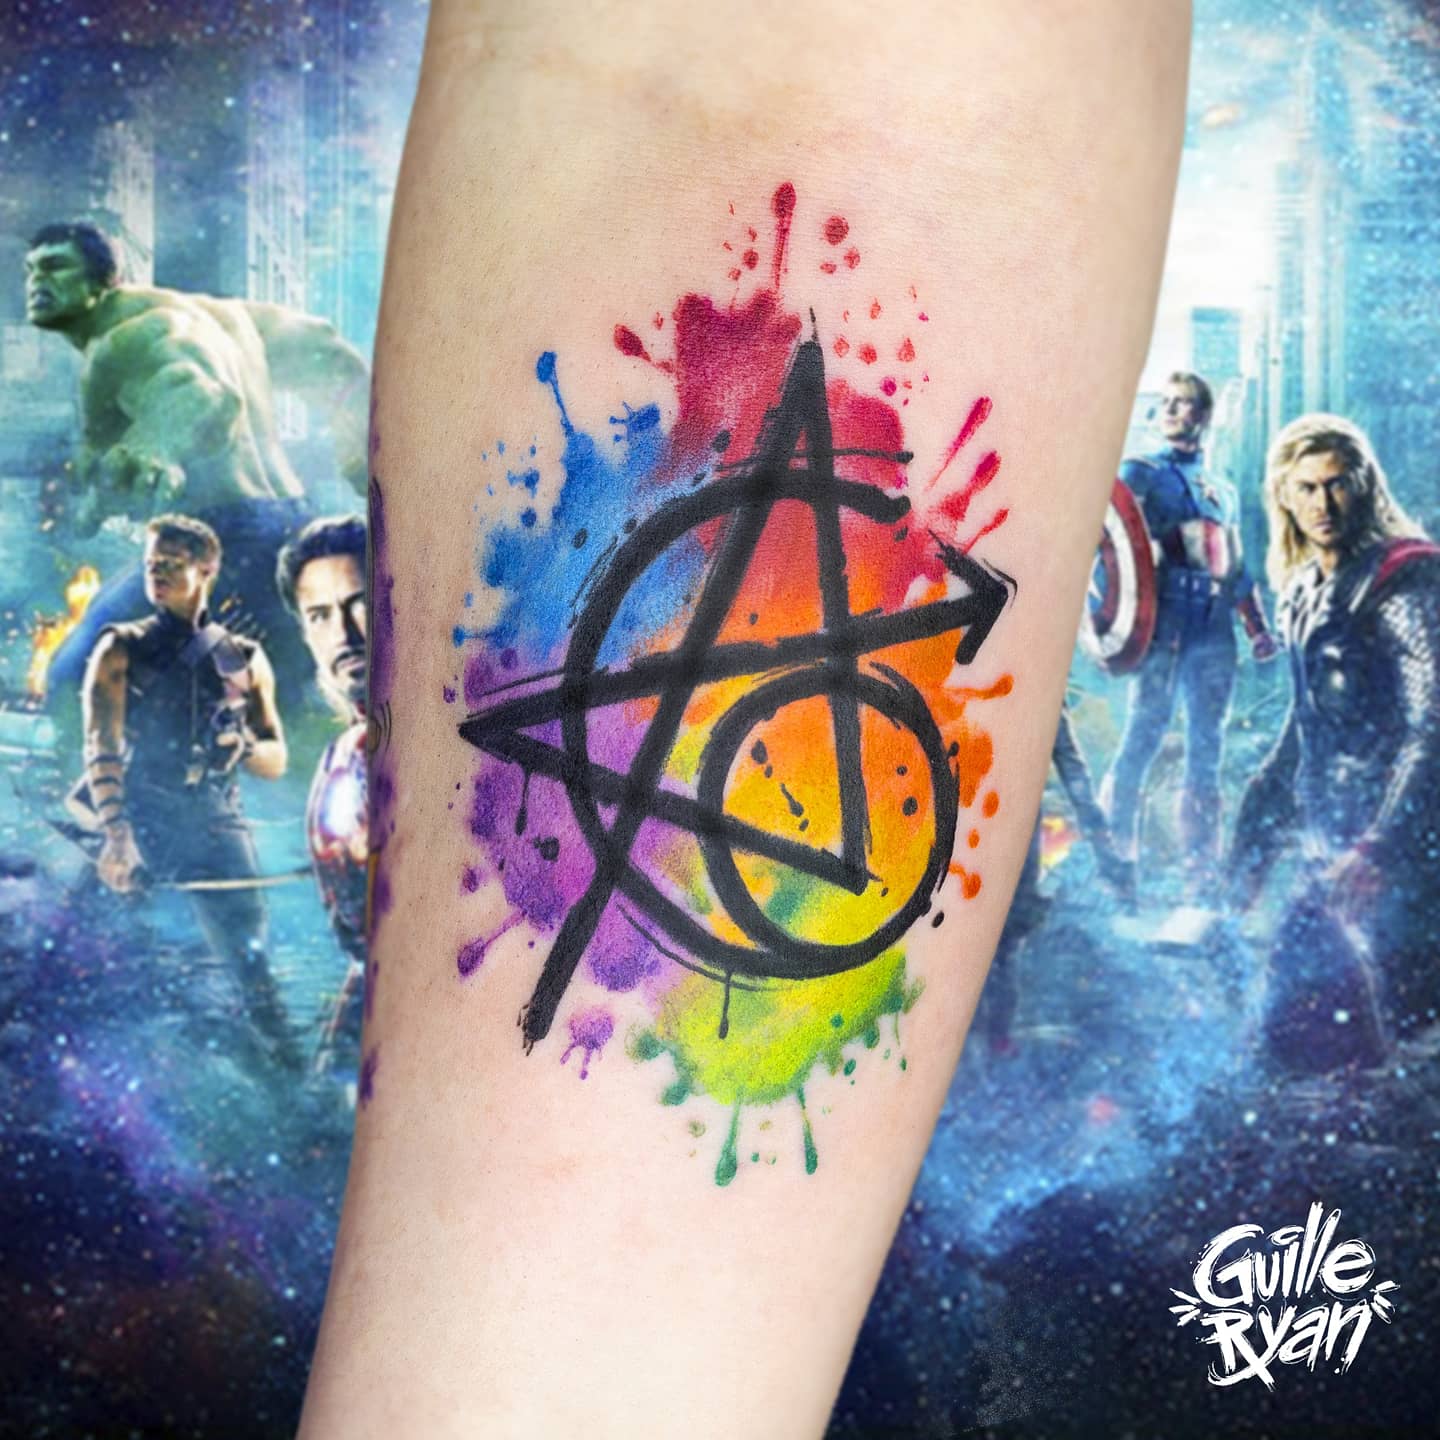 Wendall smith - #avengers #tattoo #avengerstattoo #hero #heroes  #tattoowendall #subculturecity #subculture #watercolor #watercolortattoo  #ink #inked #nctattooers | Facebook